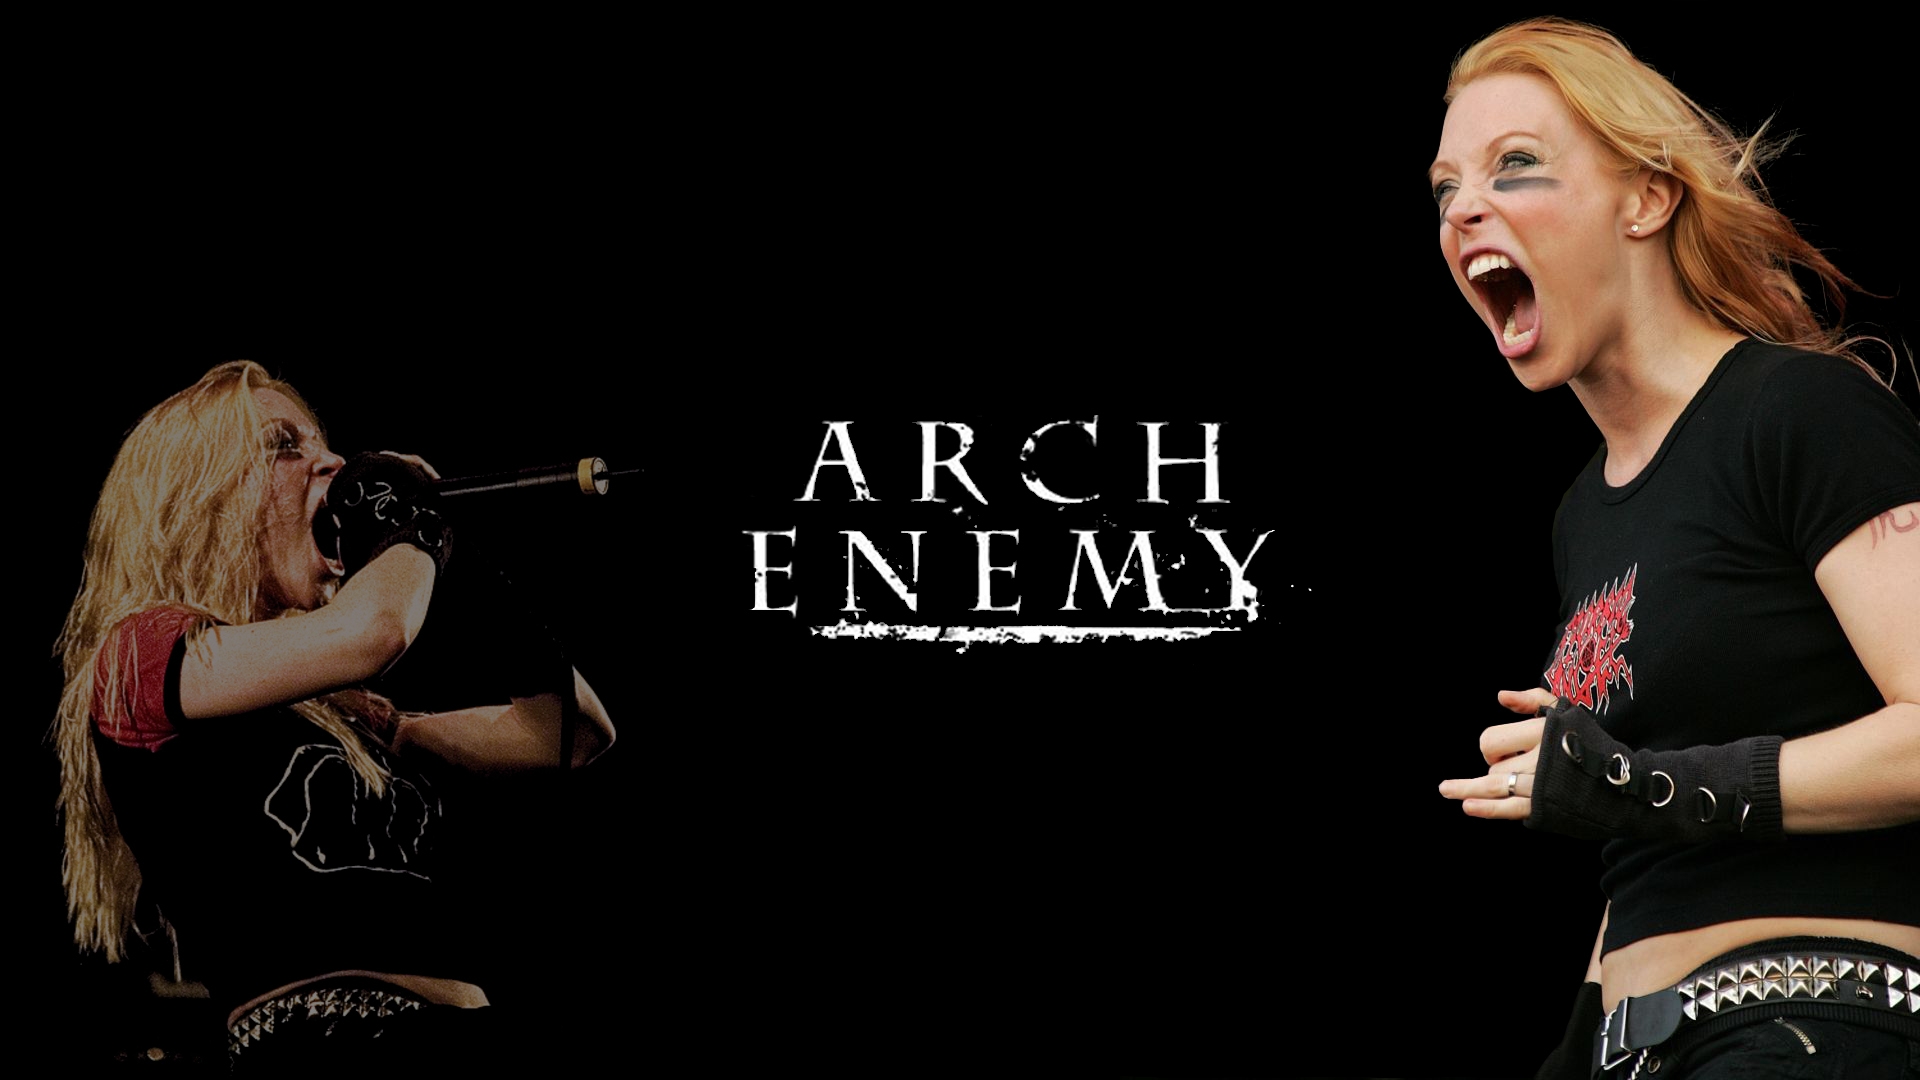 arch, Enemy, Technical, Power, Death, Metal, Hard, Rock, Heavy, Concert, Concerts Wallpaper